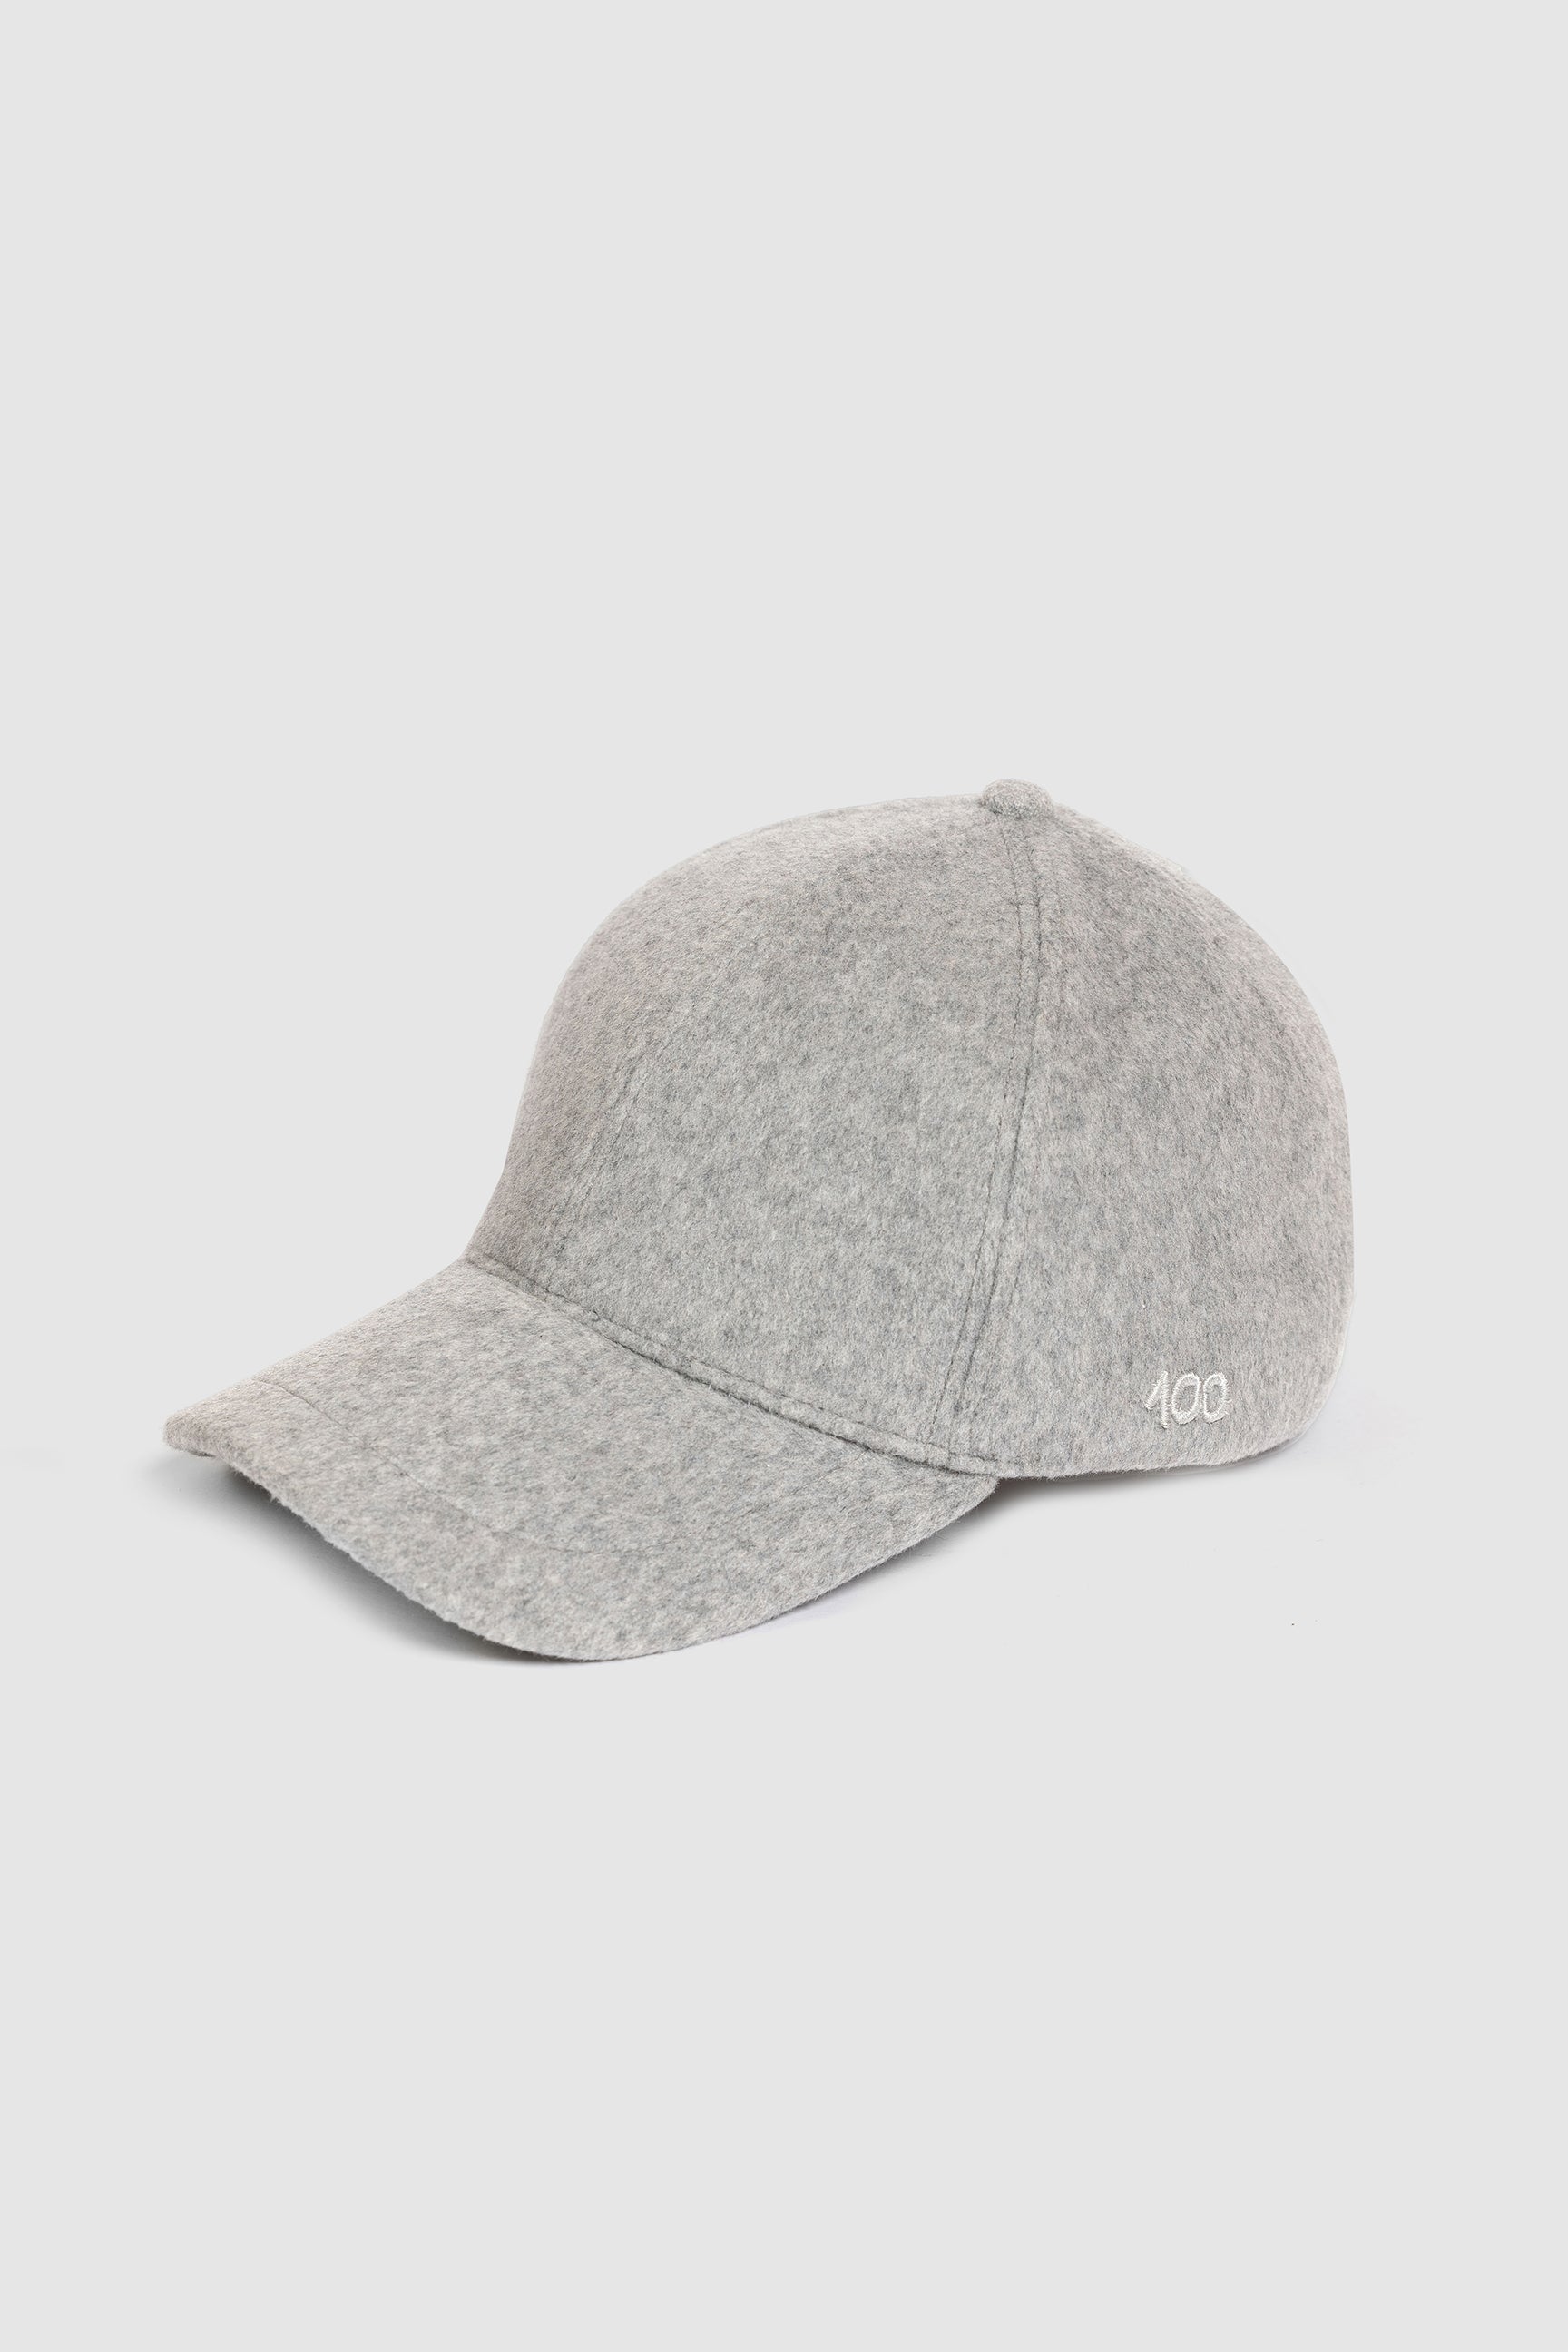 The 100 Cap in Smoke Cashmere (Smoke (562) / One Size)